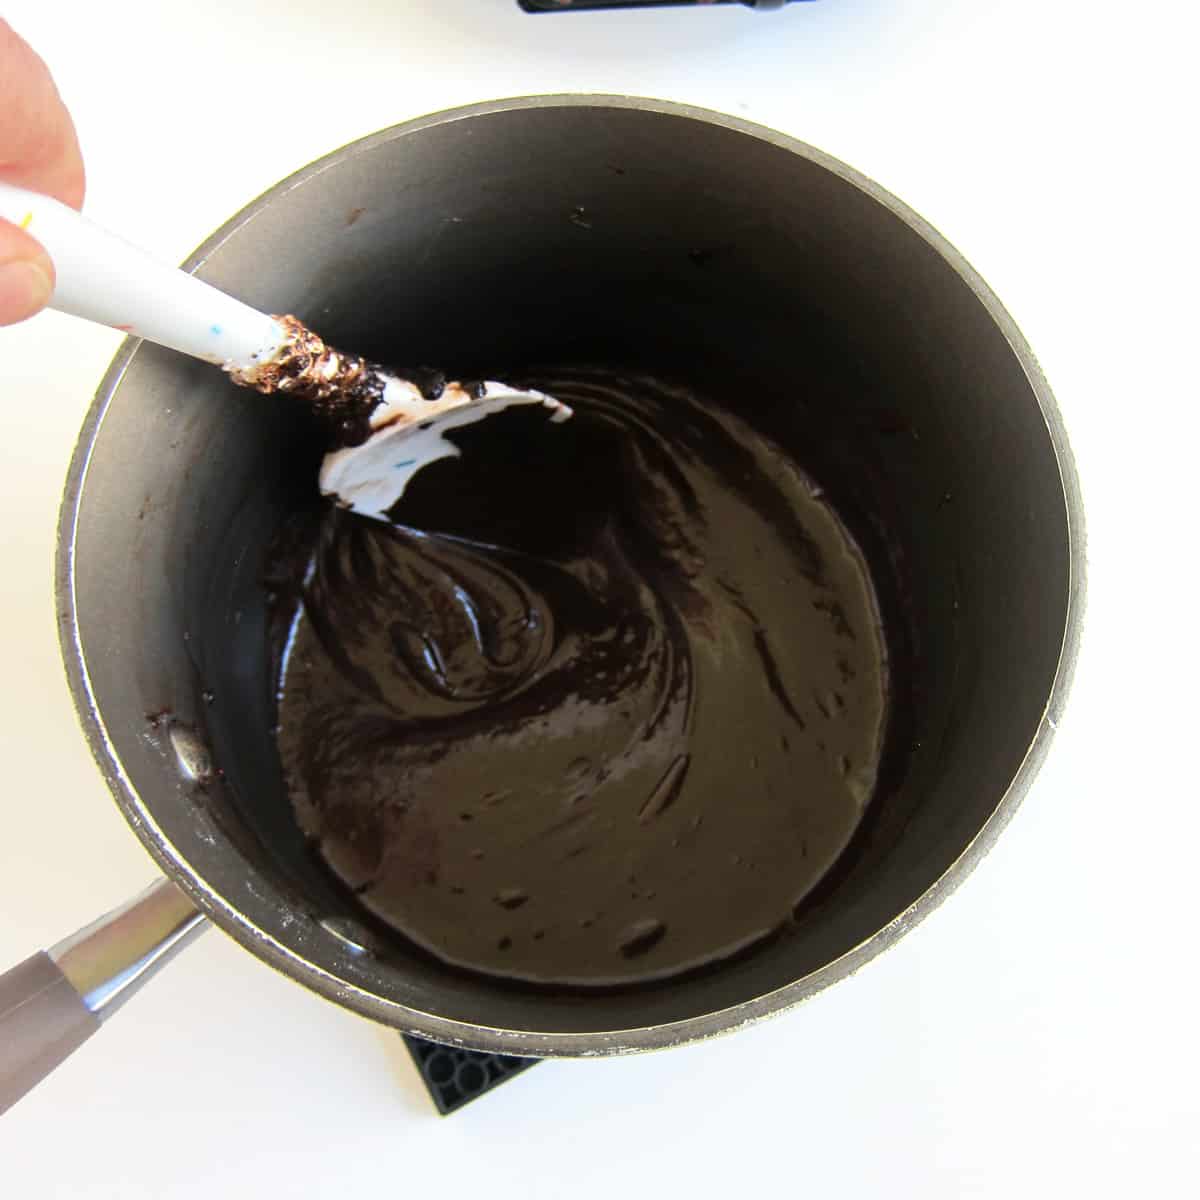 stirring melted butter, marshmallows, chocolate, and cocoa powder together until smooth